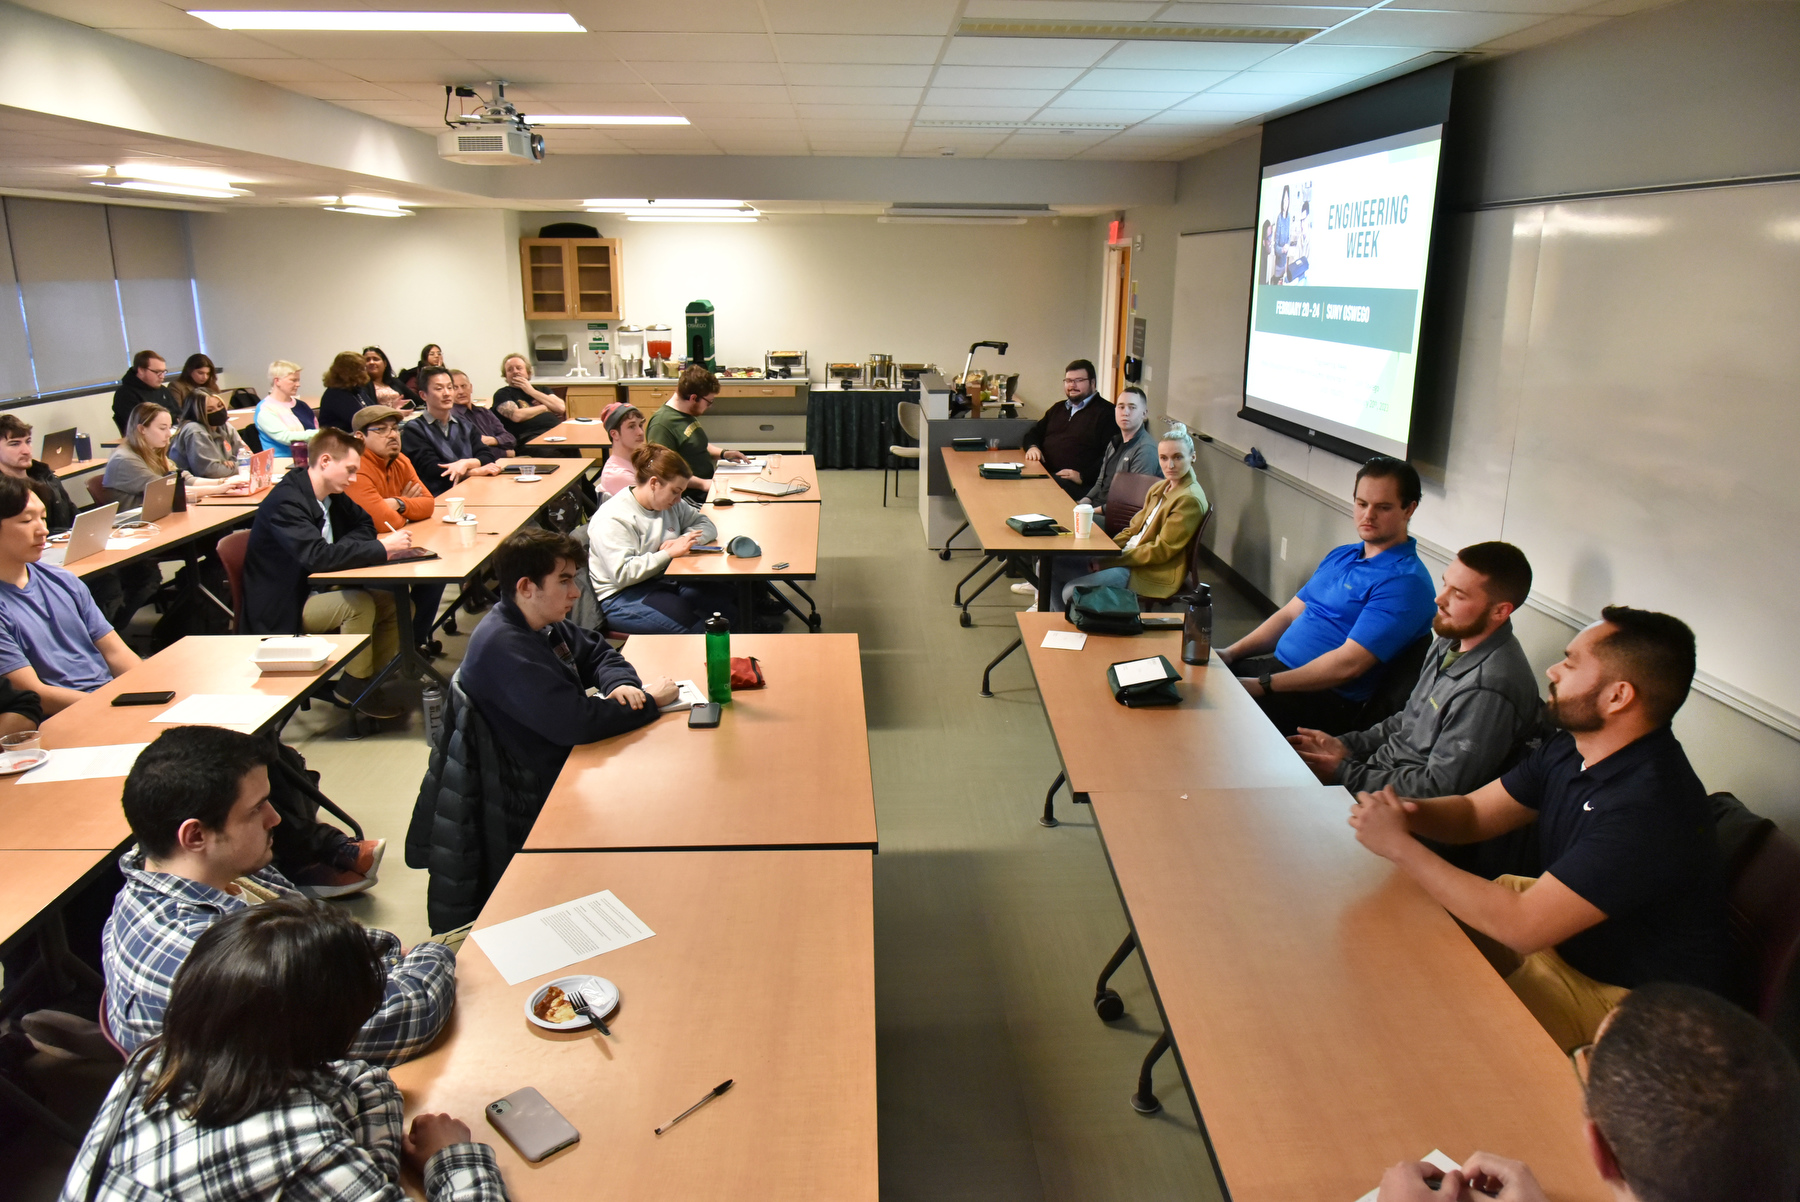 Part of Engineering Week included a panel discussion of eight recent graduates from the electrical and computer engineering department (ECE) who spoke about the industry.